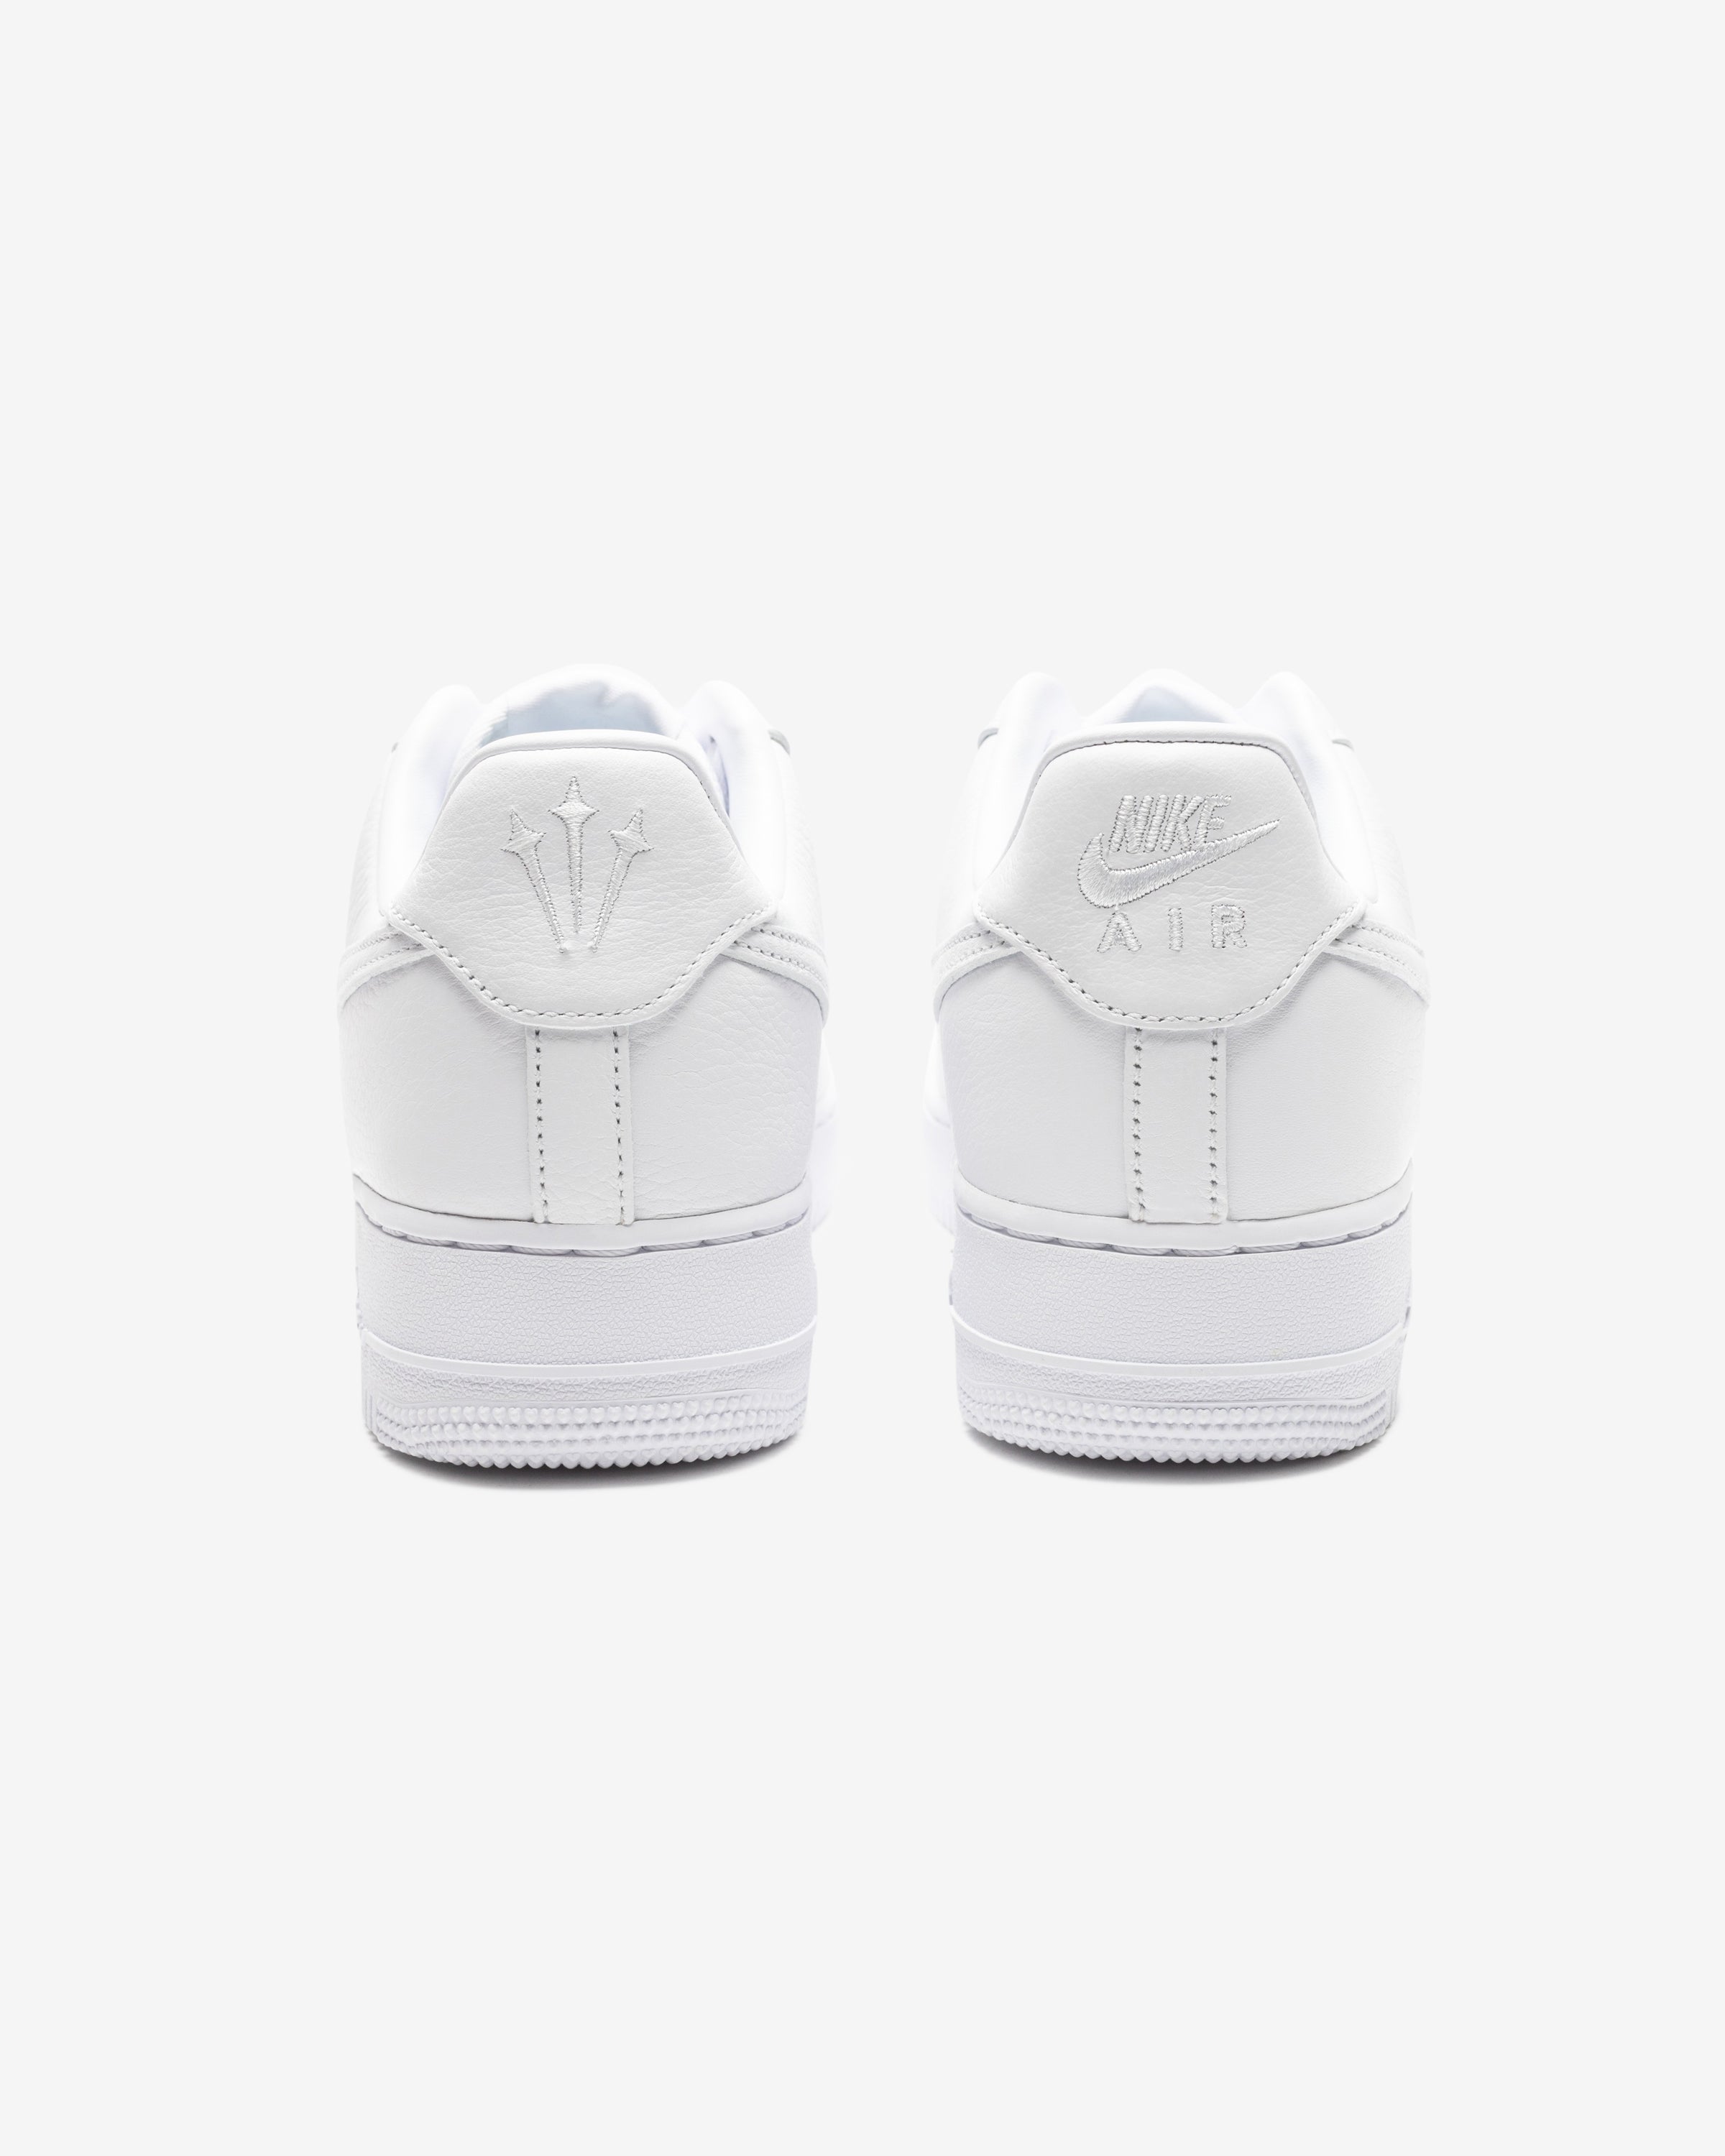 NIKE X NOCTA AIR FORCE 1 LOW - WHITE/ COBALTTINT – Undefeated